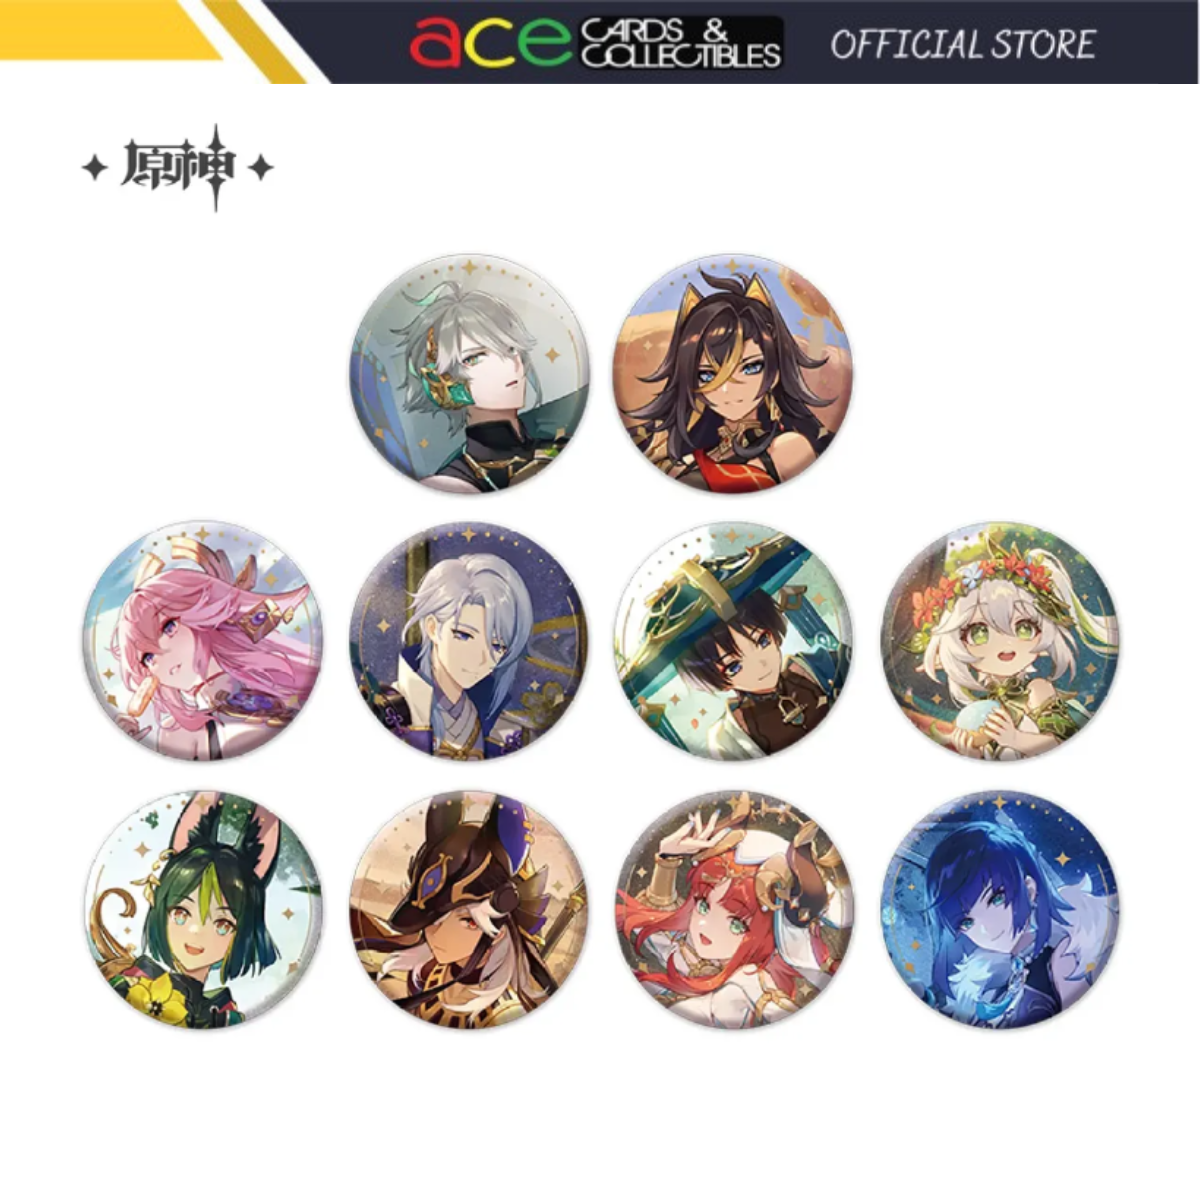 miHoYo Genshin Impact Anecdote Series Characters Badge-Miko-miHoYo-Ace Cards & Collectibles